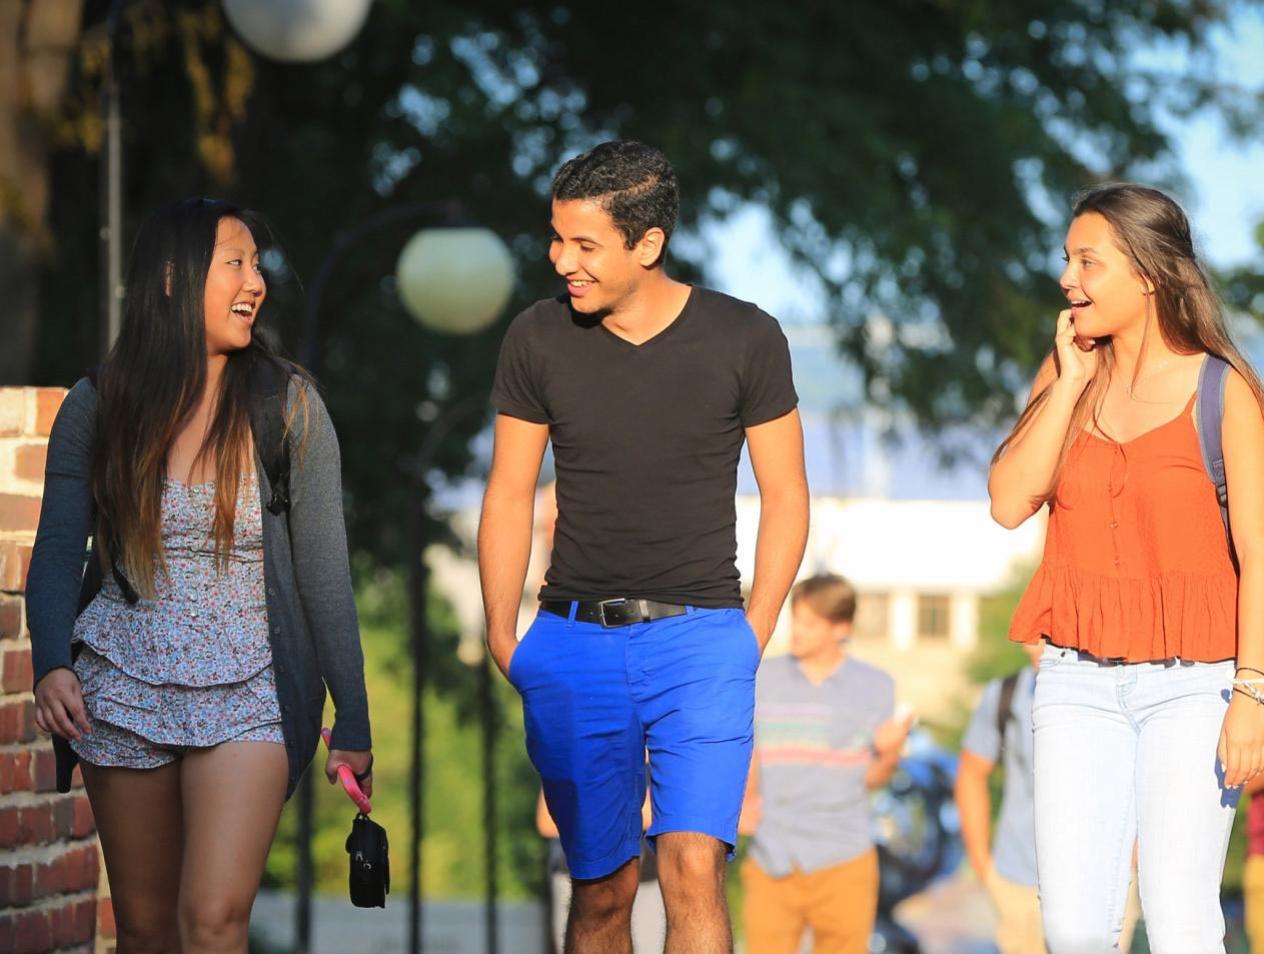 Three Creighton students smiling and laughing while walking on the Creighton mall on a warm day.